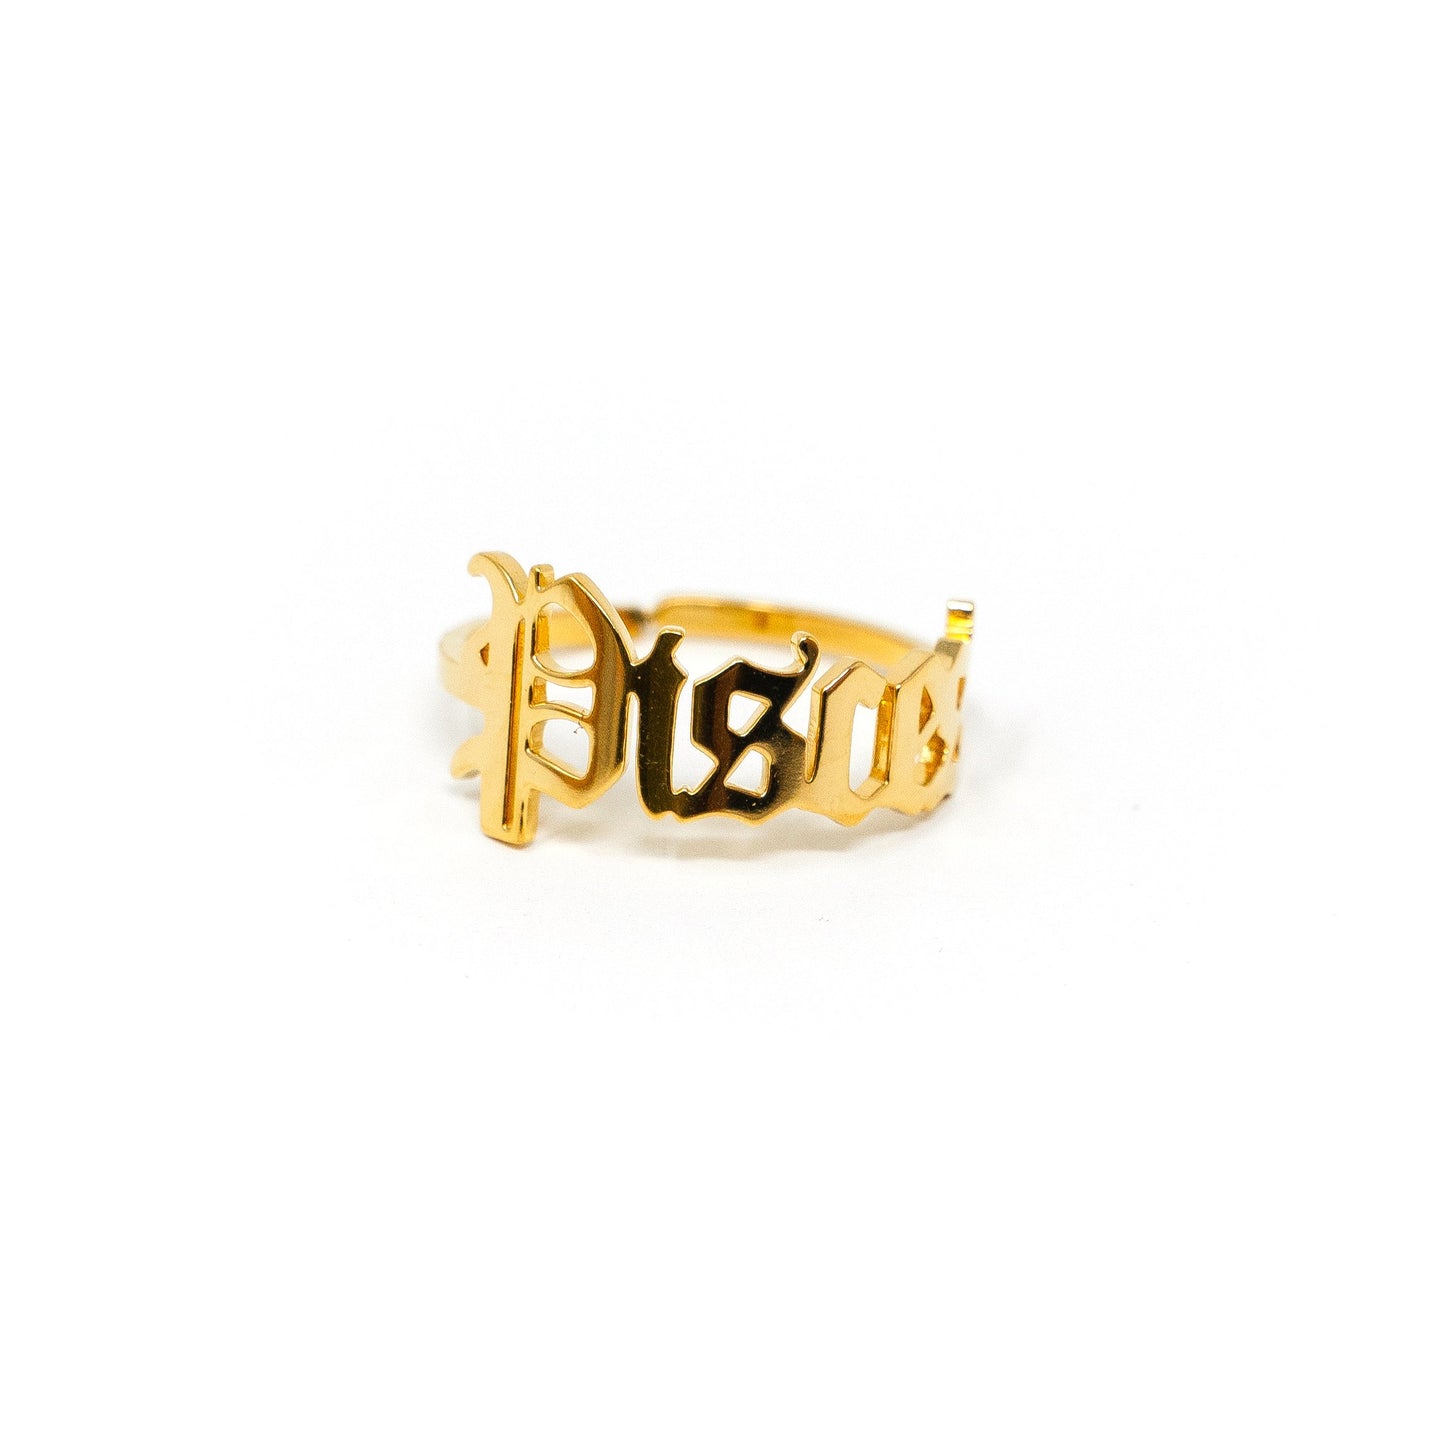 Zodiac Olde English Adjustable Rings JEWELRY The Sis Kiss Pisces